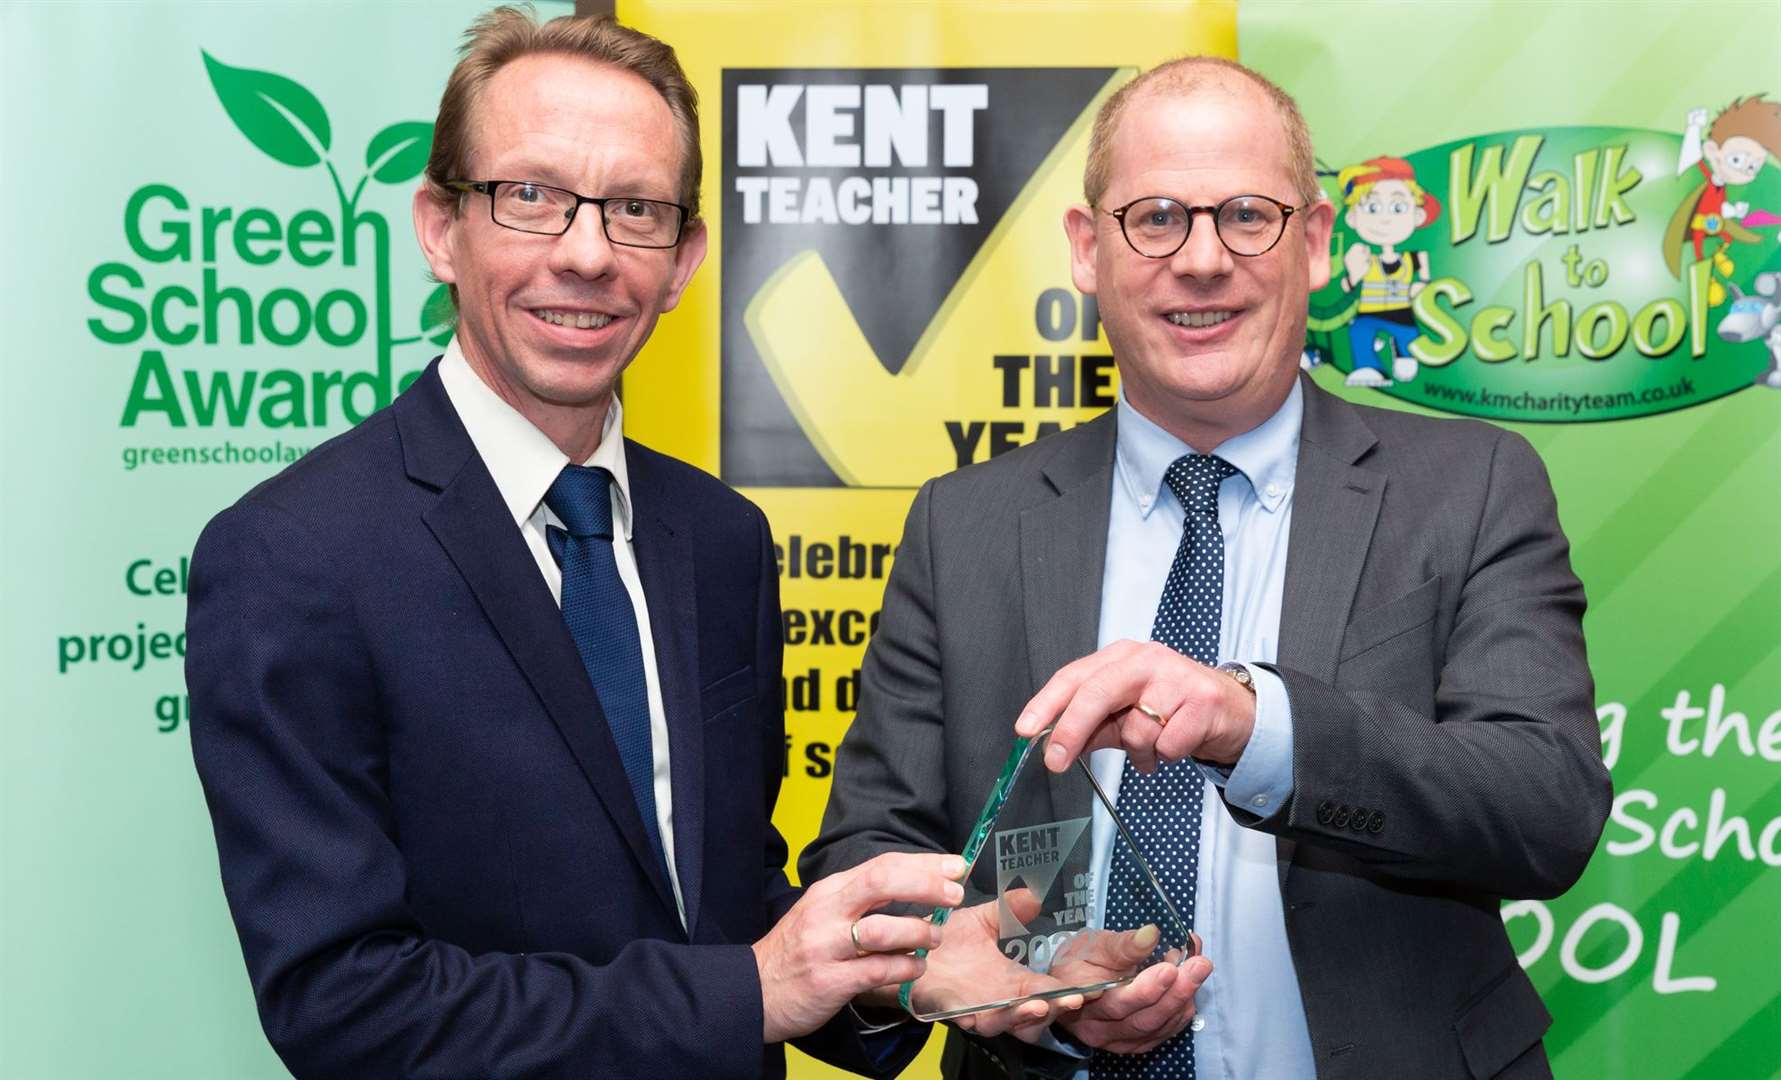 Overall Kent Maths Teacher of the Year, Ian Chapman of Rainham Mark Grammar School. Presented by Mike Rayner of the Education People. Picture: Countrywide Photographic